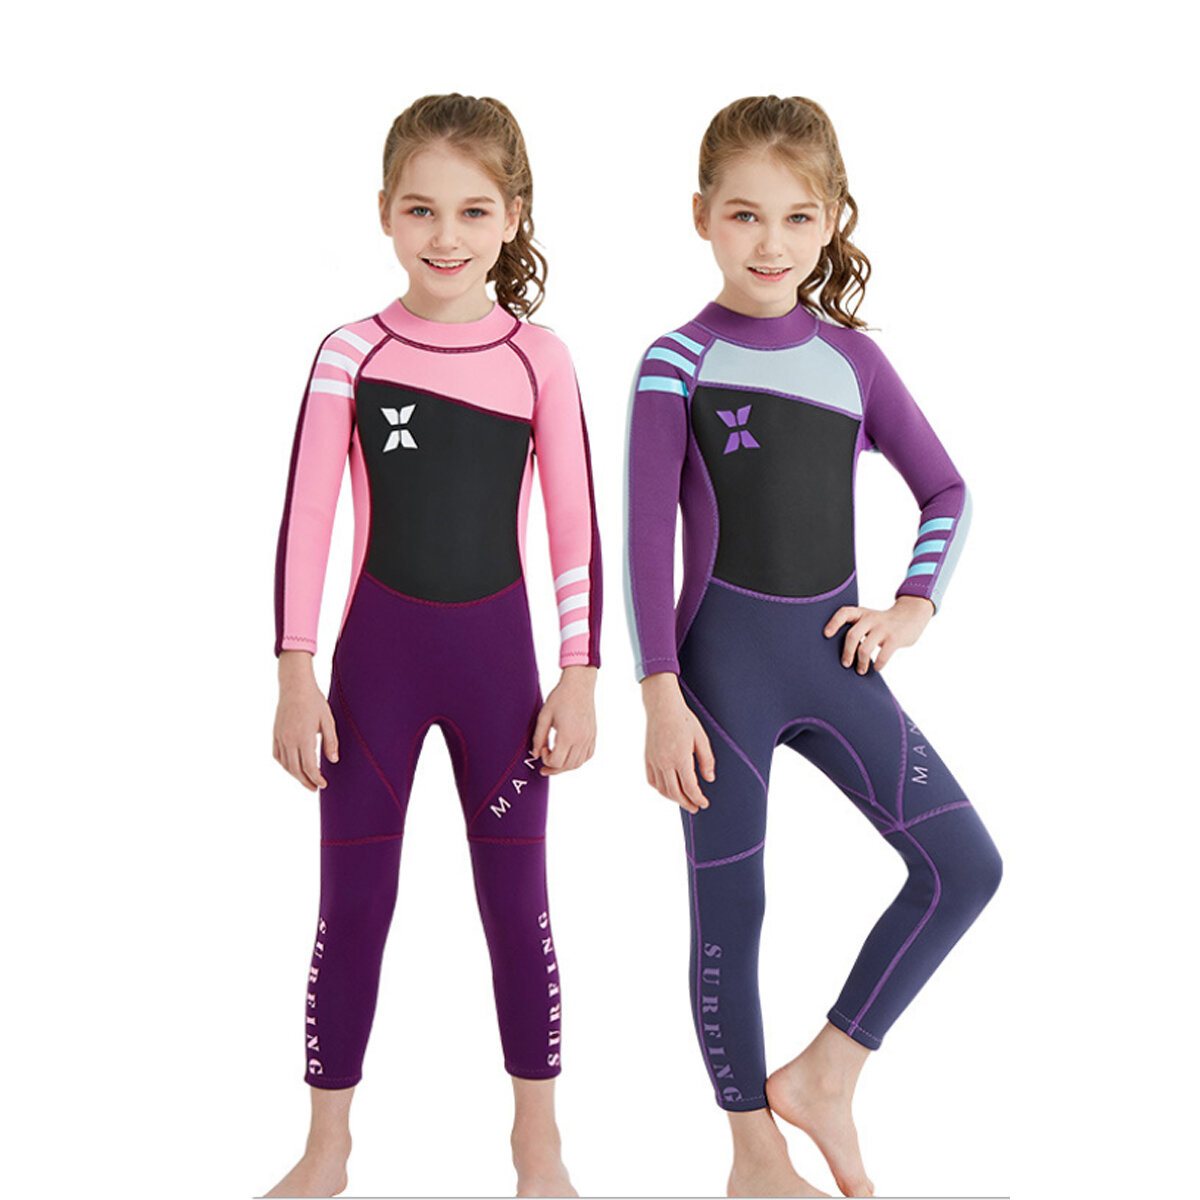 Image of Kids Diving Suit 25MM Neoprene Wetsuit Children For Boys Girls Keep Warm One-piece Long Sleeves UV Protection Swimwear